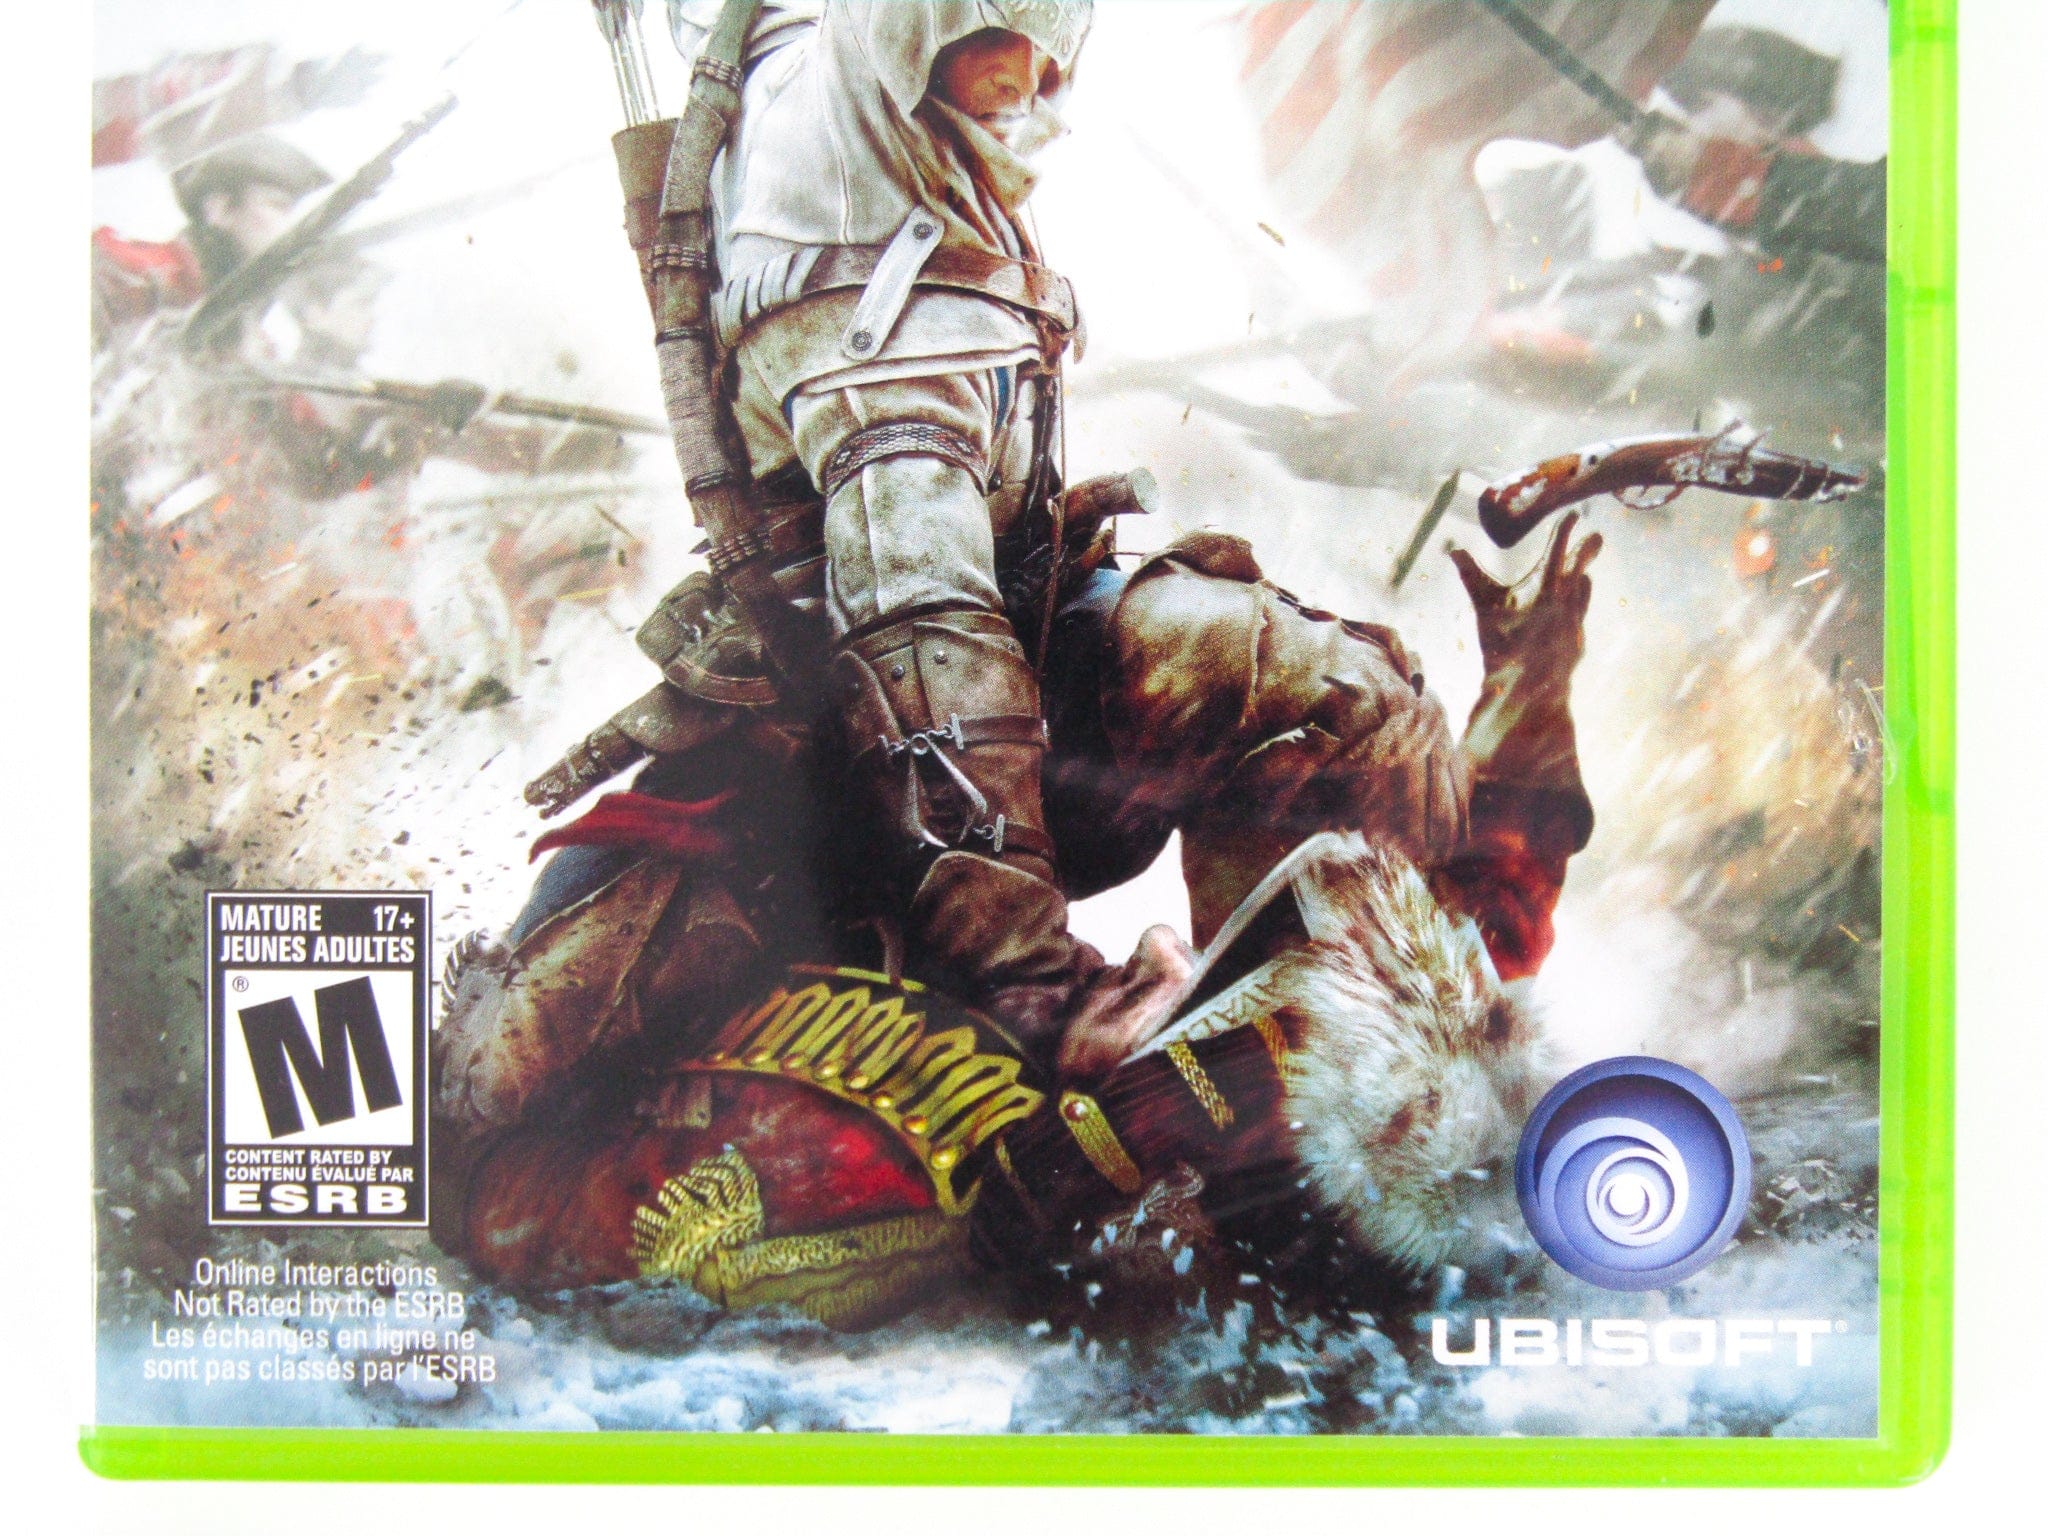 Xbox 360 - Assassin's Creed 3 III Gamestop Case No DLC Xbox 360 Comple –  vandalsgaming